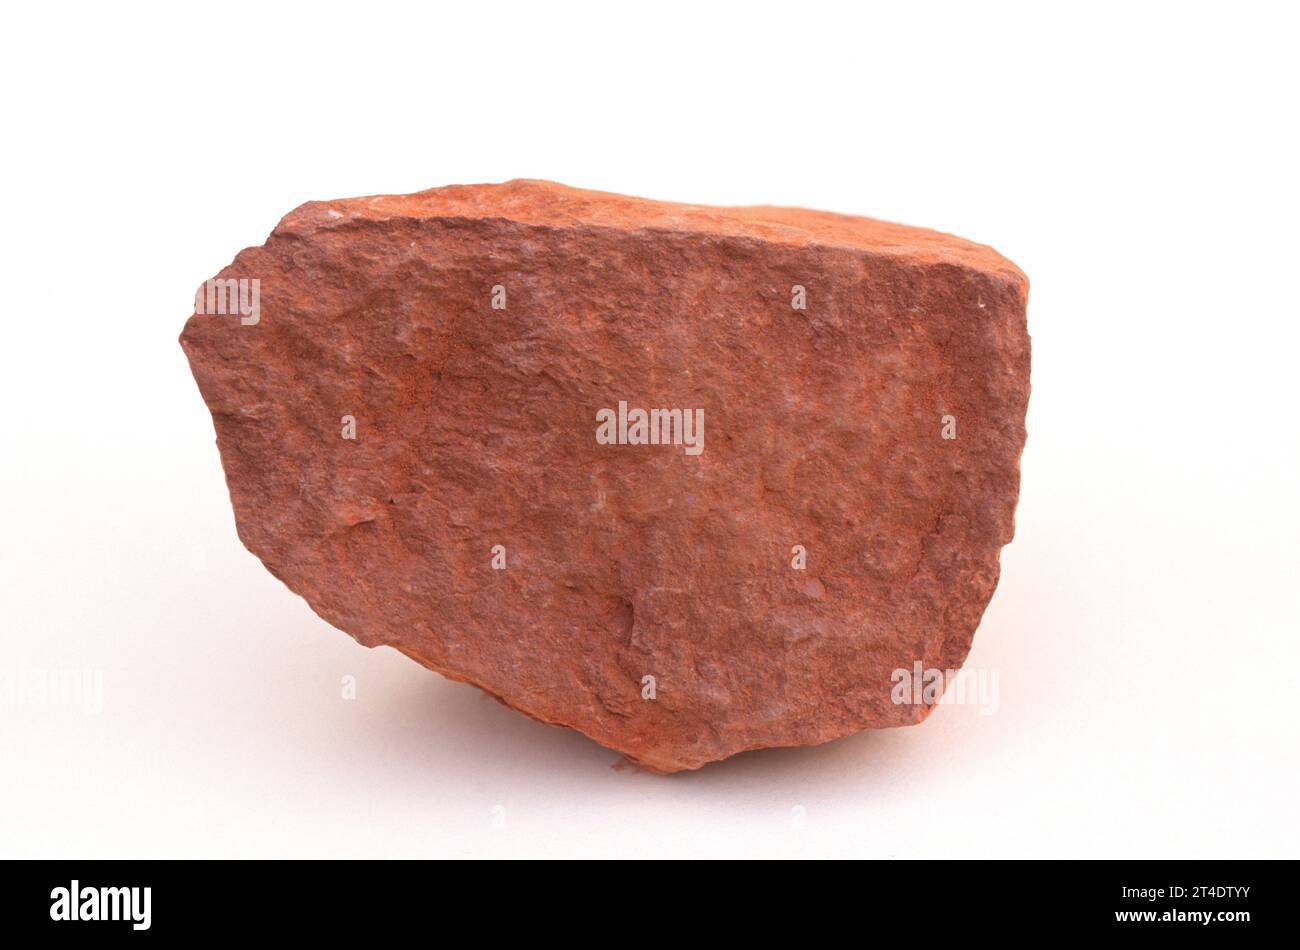 Red mudstone is a fine-grained sedimentary rock composed by clay minerals. Sample. Stock Photo